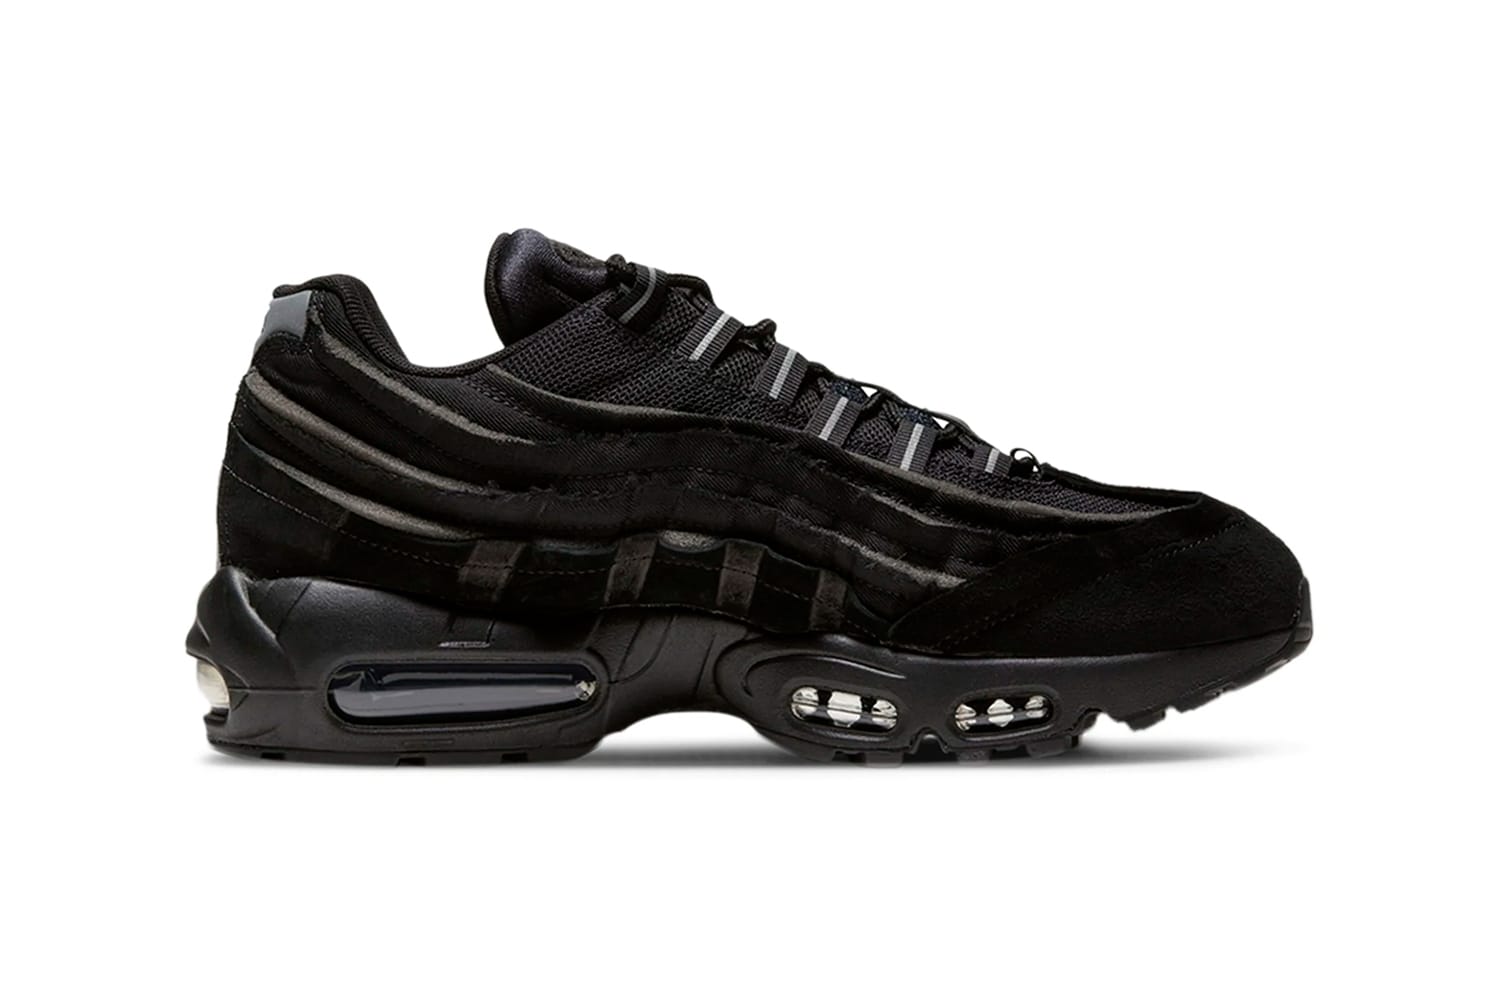 COMME des GARÇONS HOMME PLUS x Nike Air Max 95 Release | HYPEBEAST افضل تونة معلبة